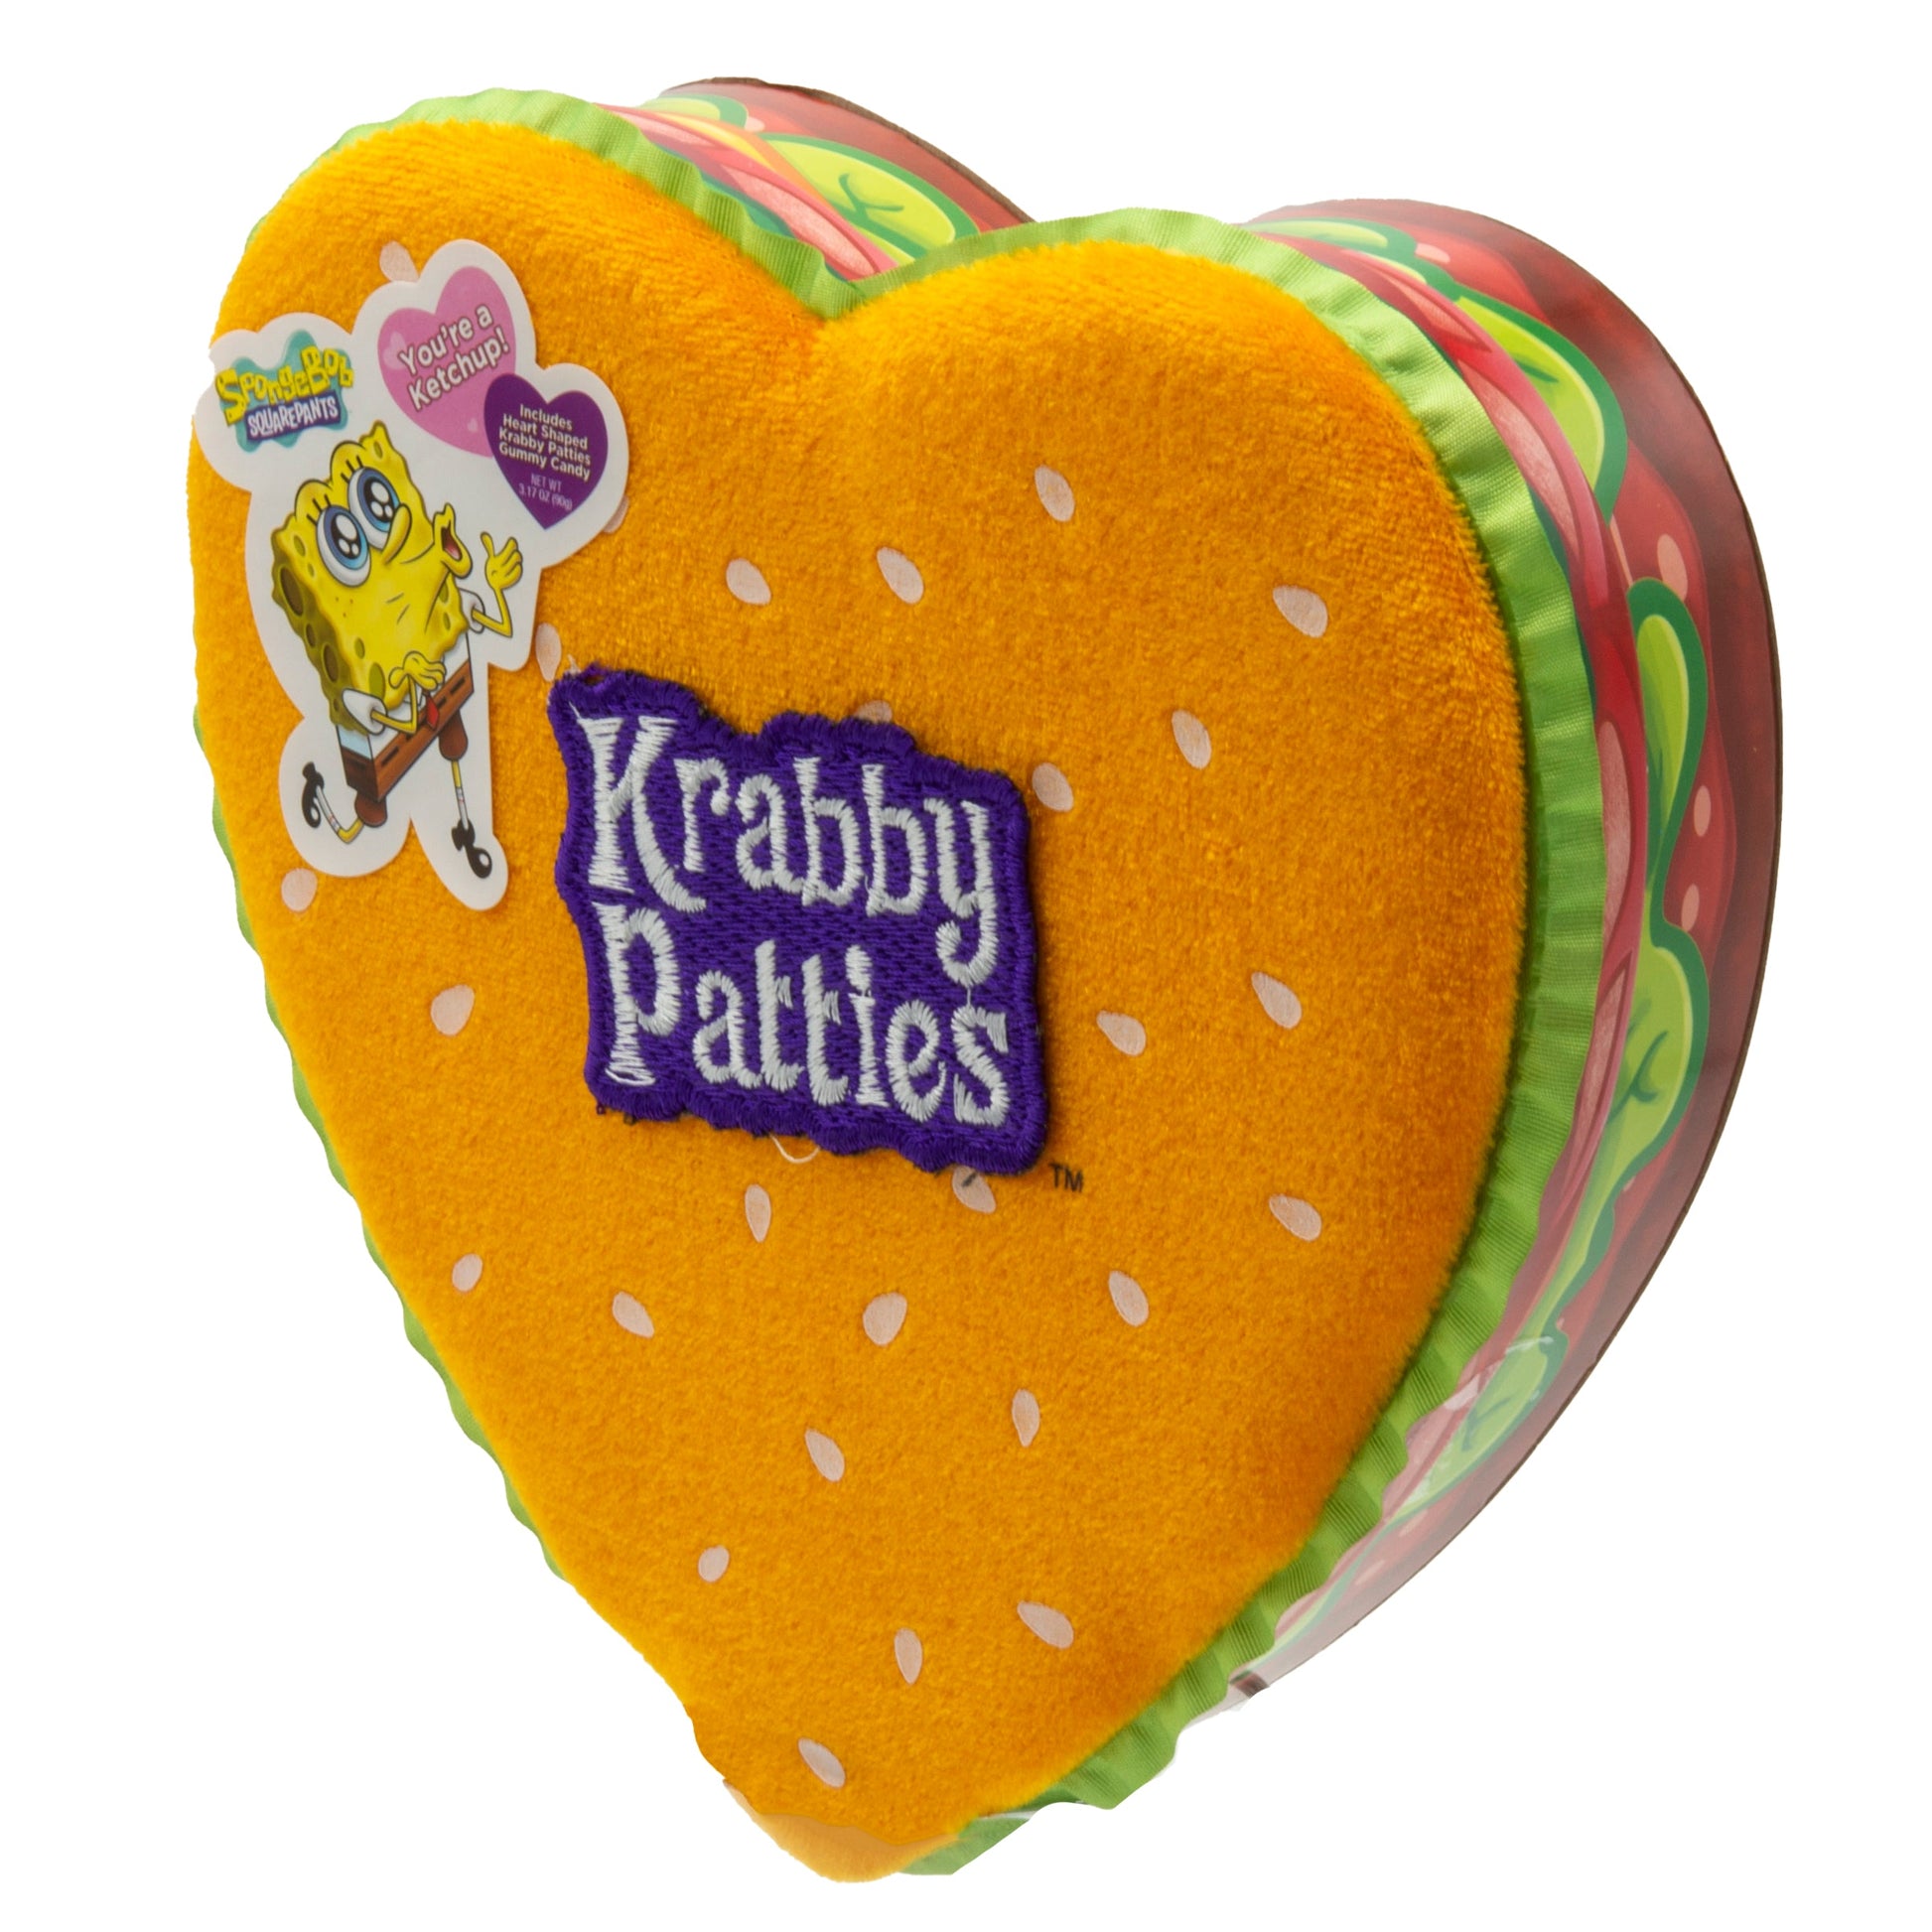 Angle of heart shaped box lined with print of lettuce, tomato, burger, and pickles 